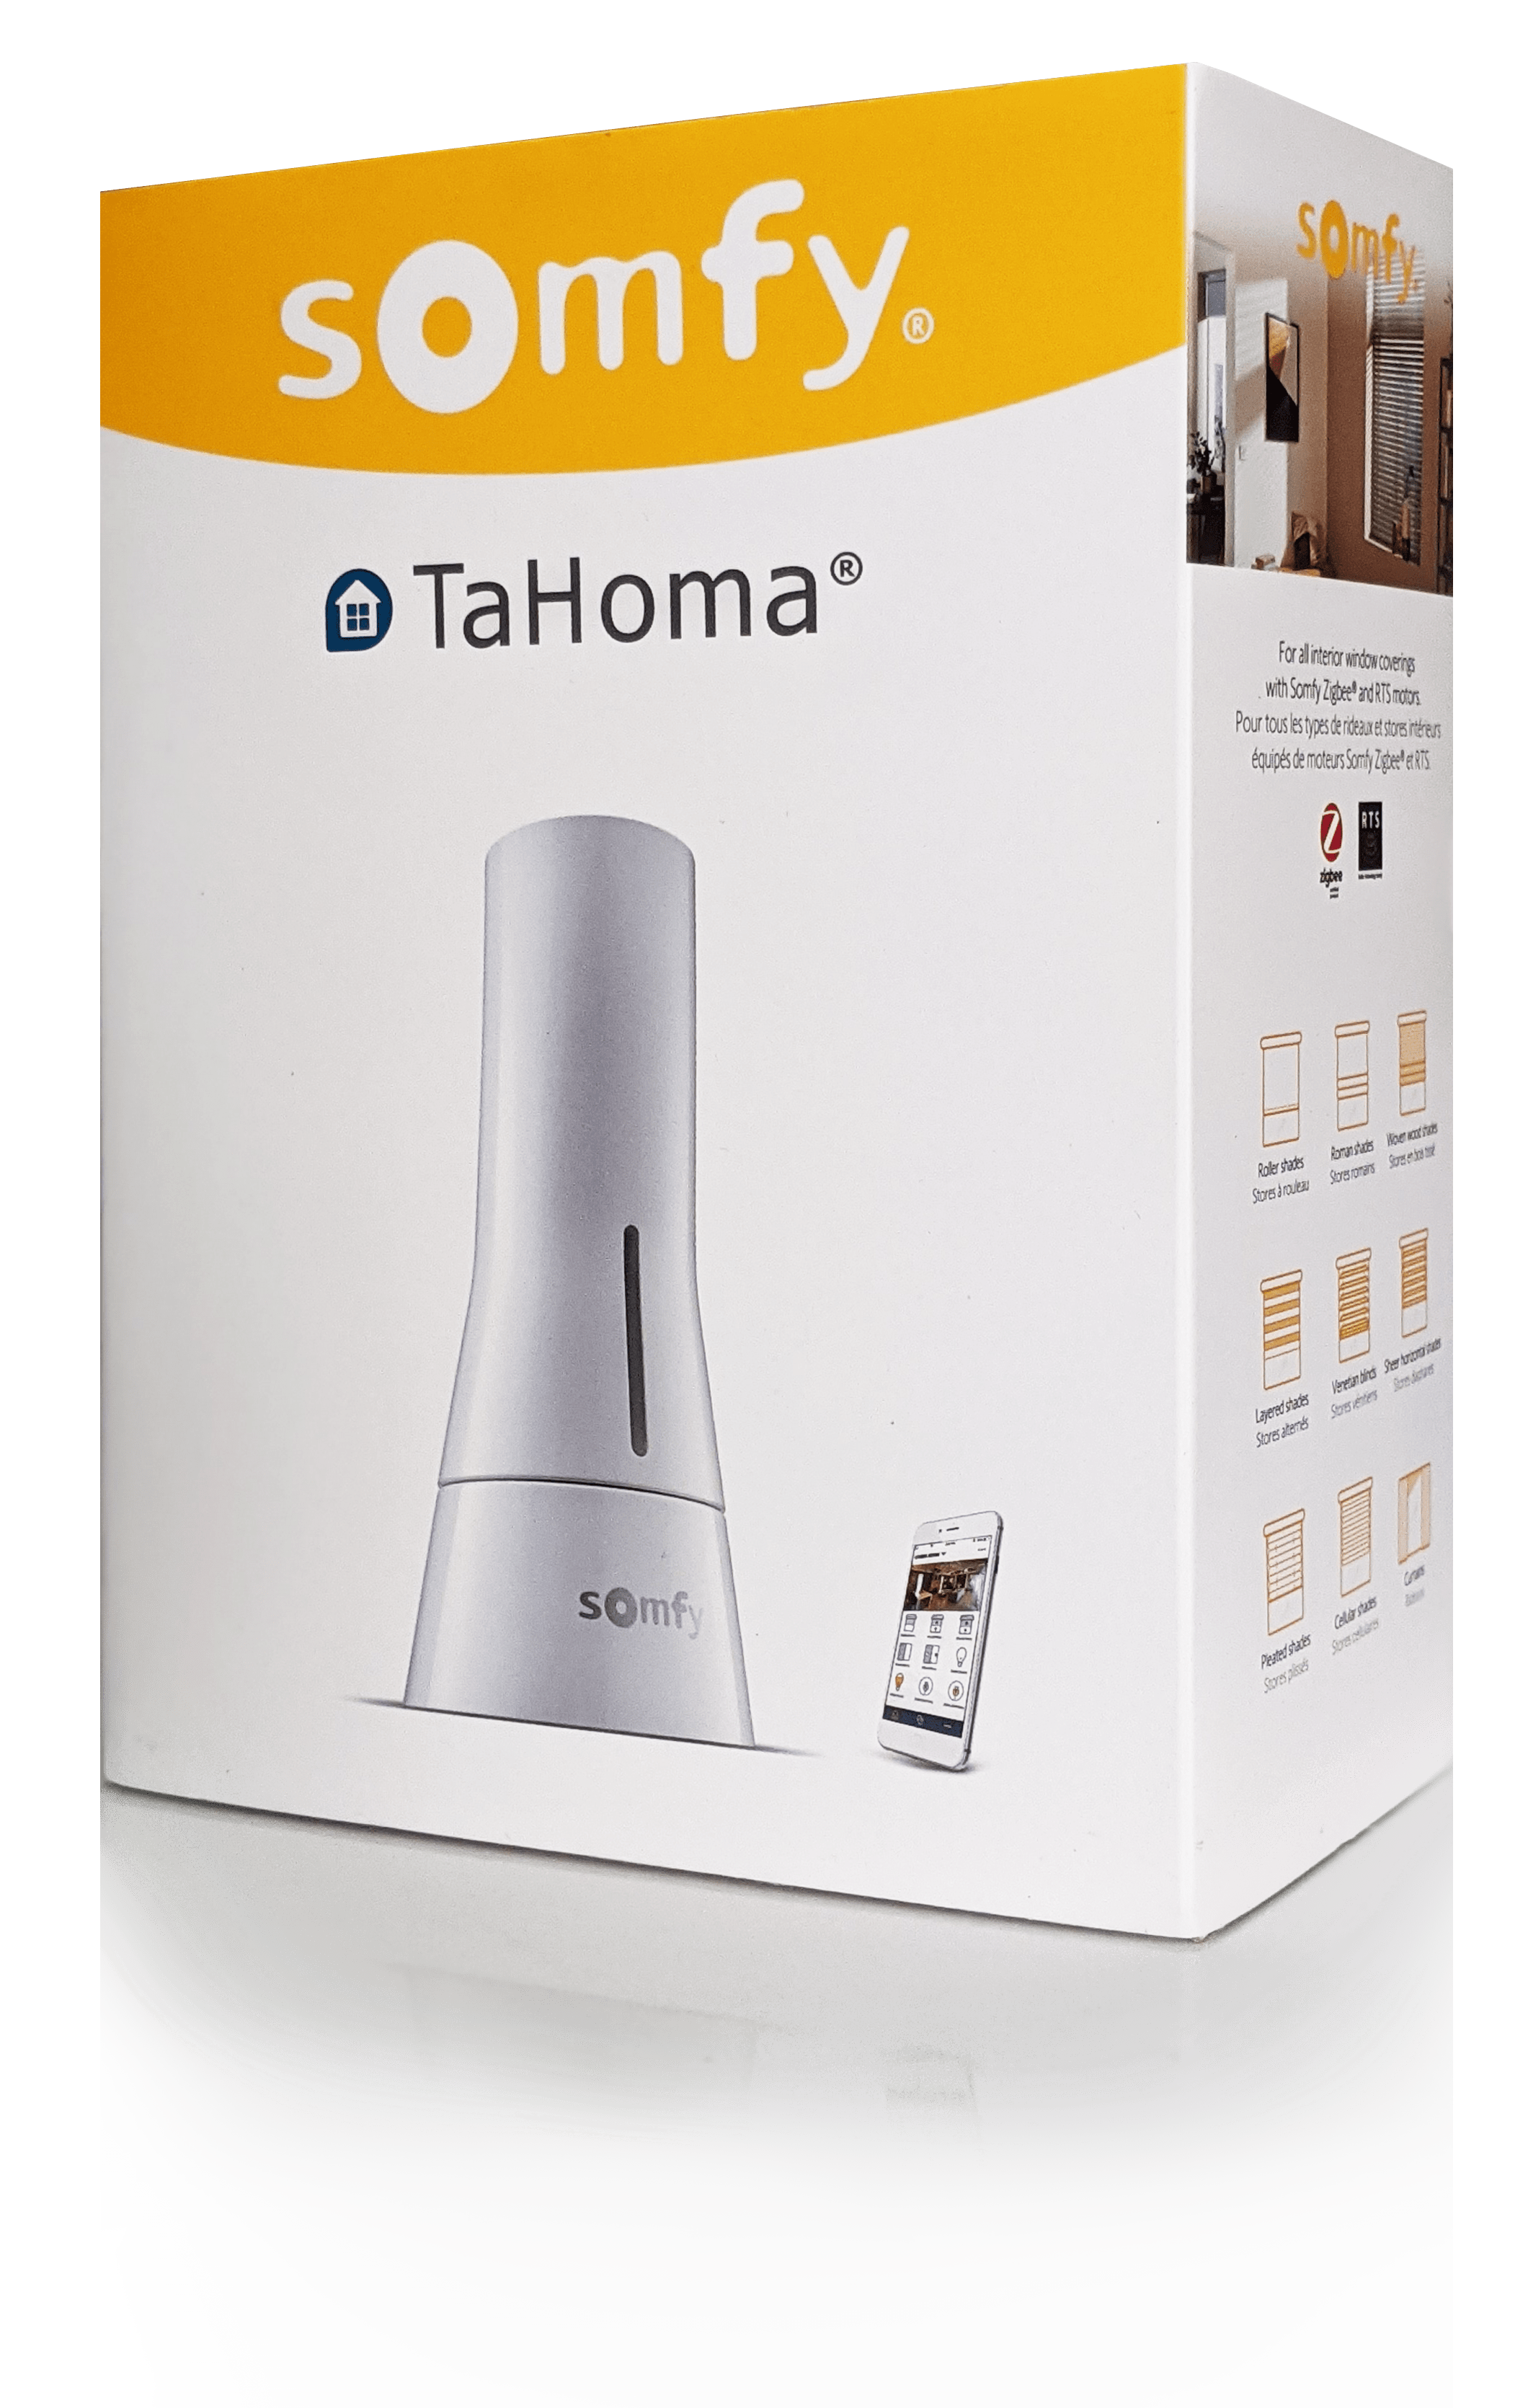 Somfy TaHoma Hub - Smart Home Gateway for RTS Blinds, Shades, Awnings -  Works with Alexa, Google Assistant, Philips Hue - Integrate with Brilliant  